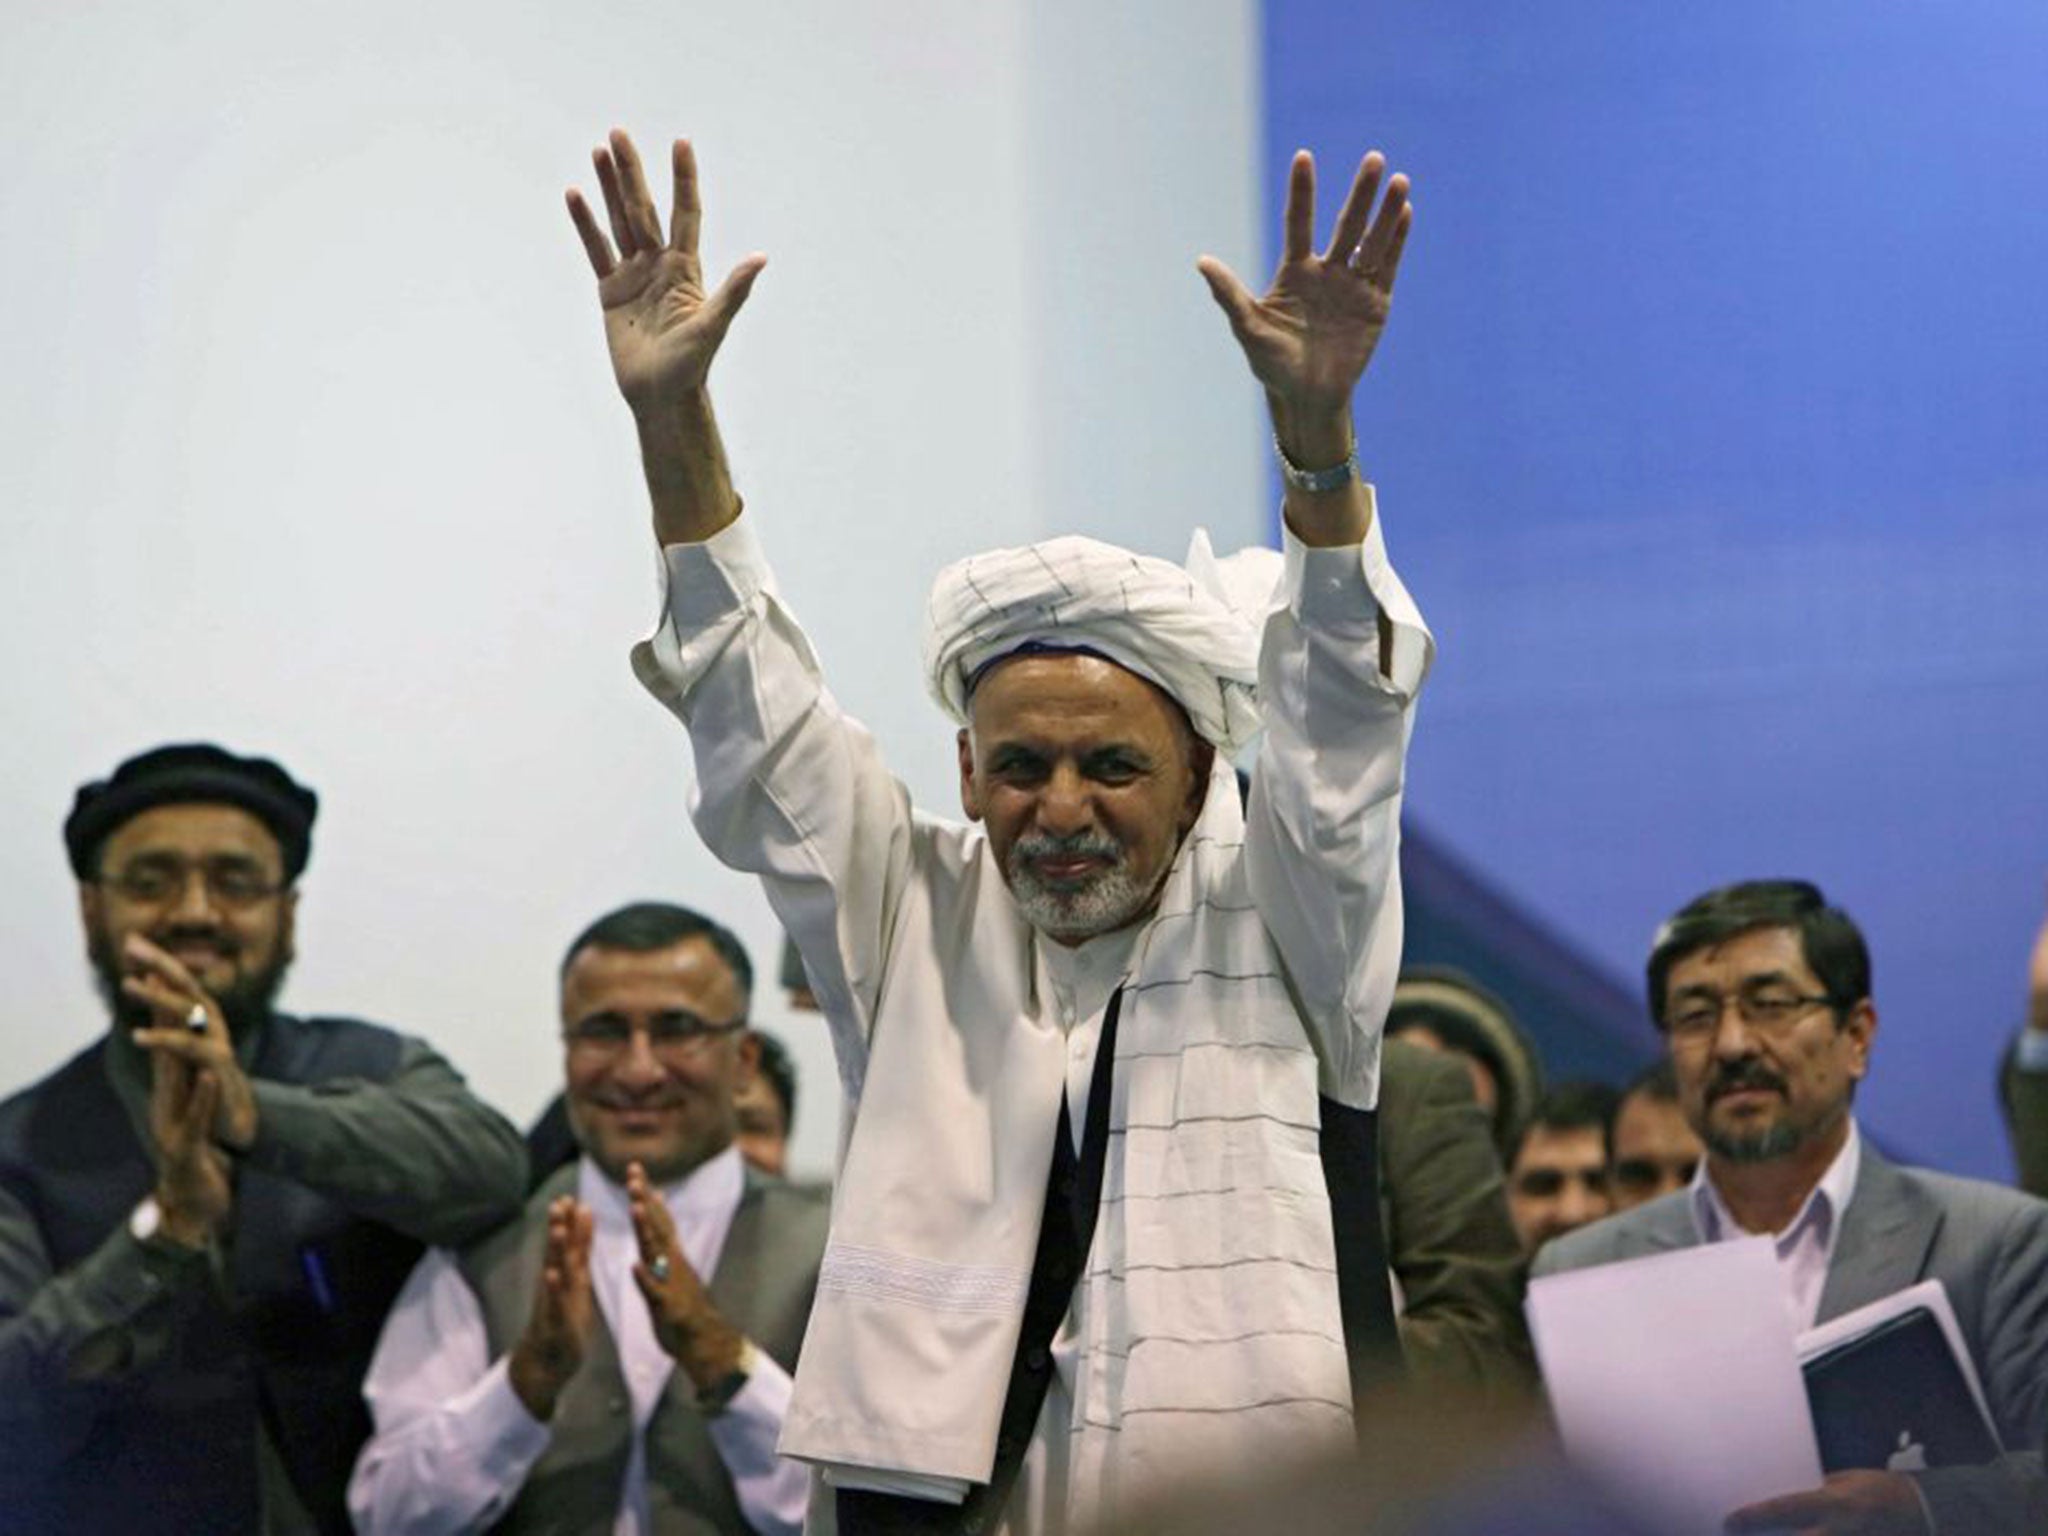 Ashraf Ghani has the lead in the presidential election with 56.44 per cent of the votes